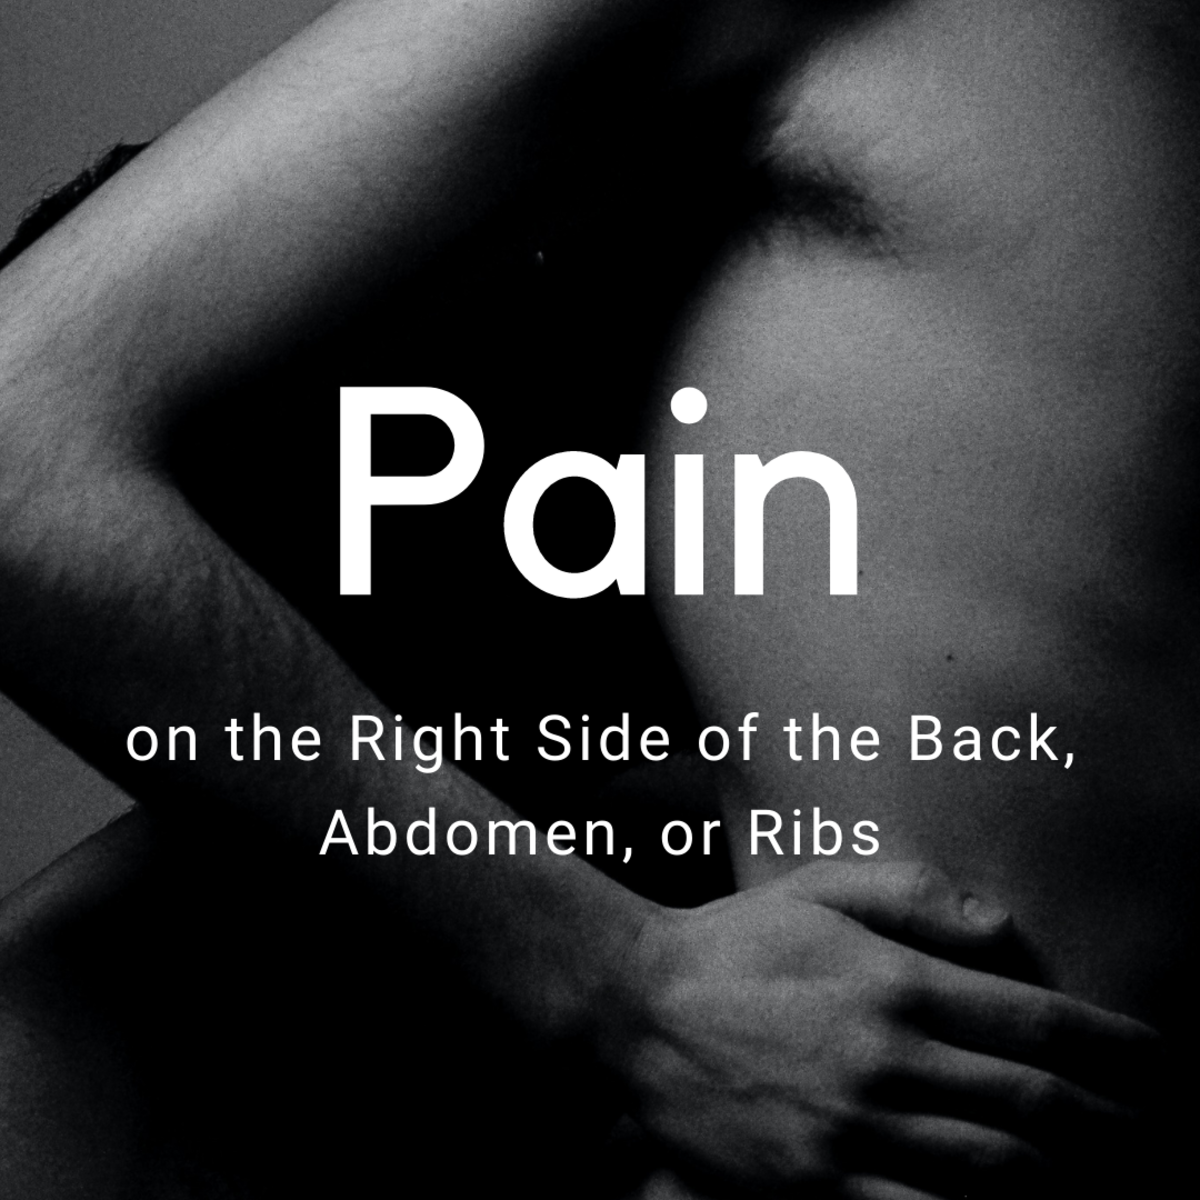 Do you have right-side back or rib pain?